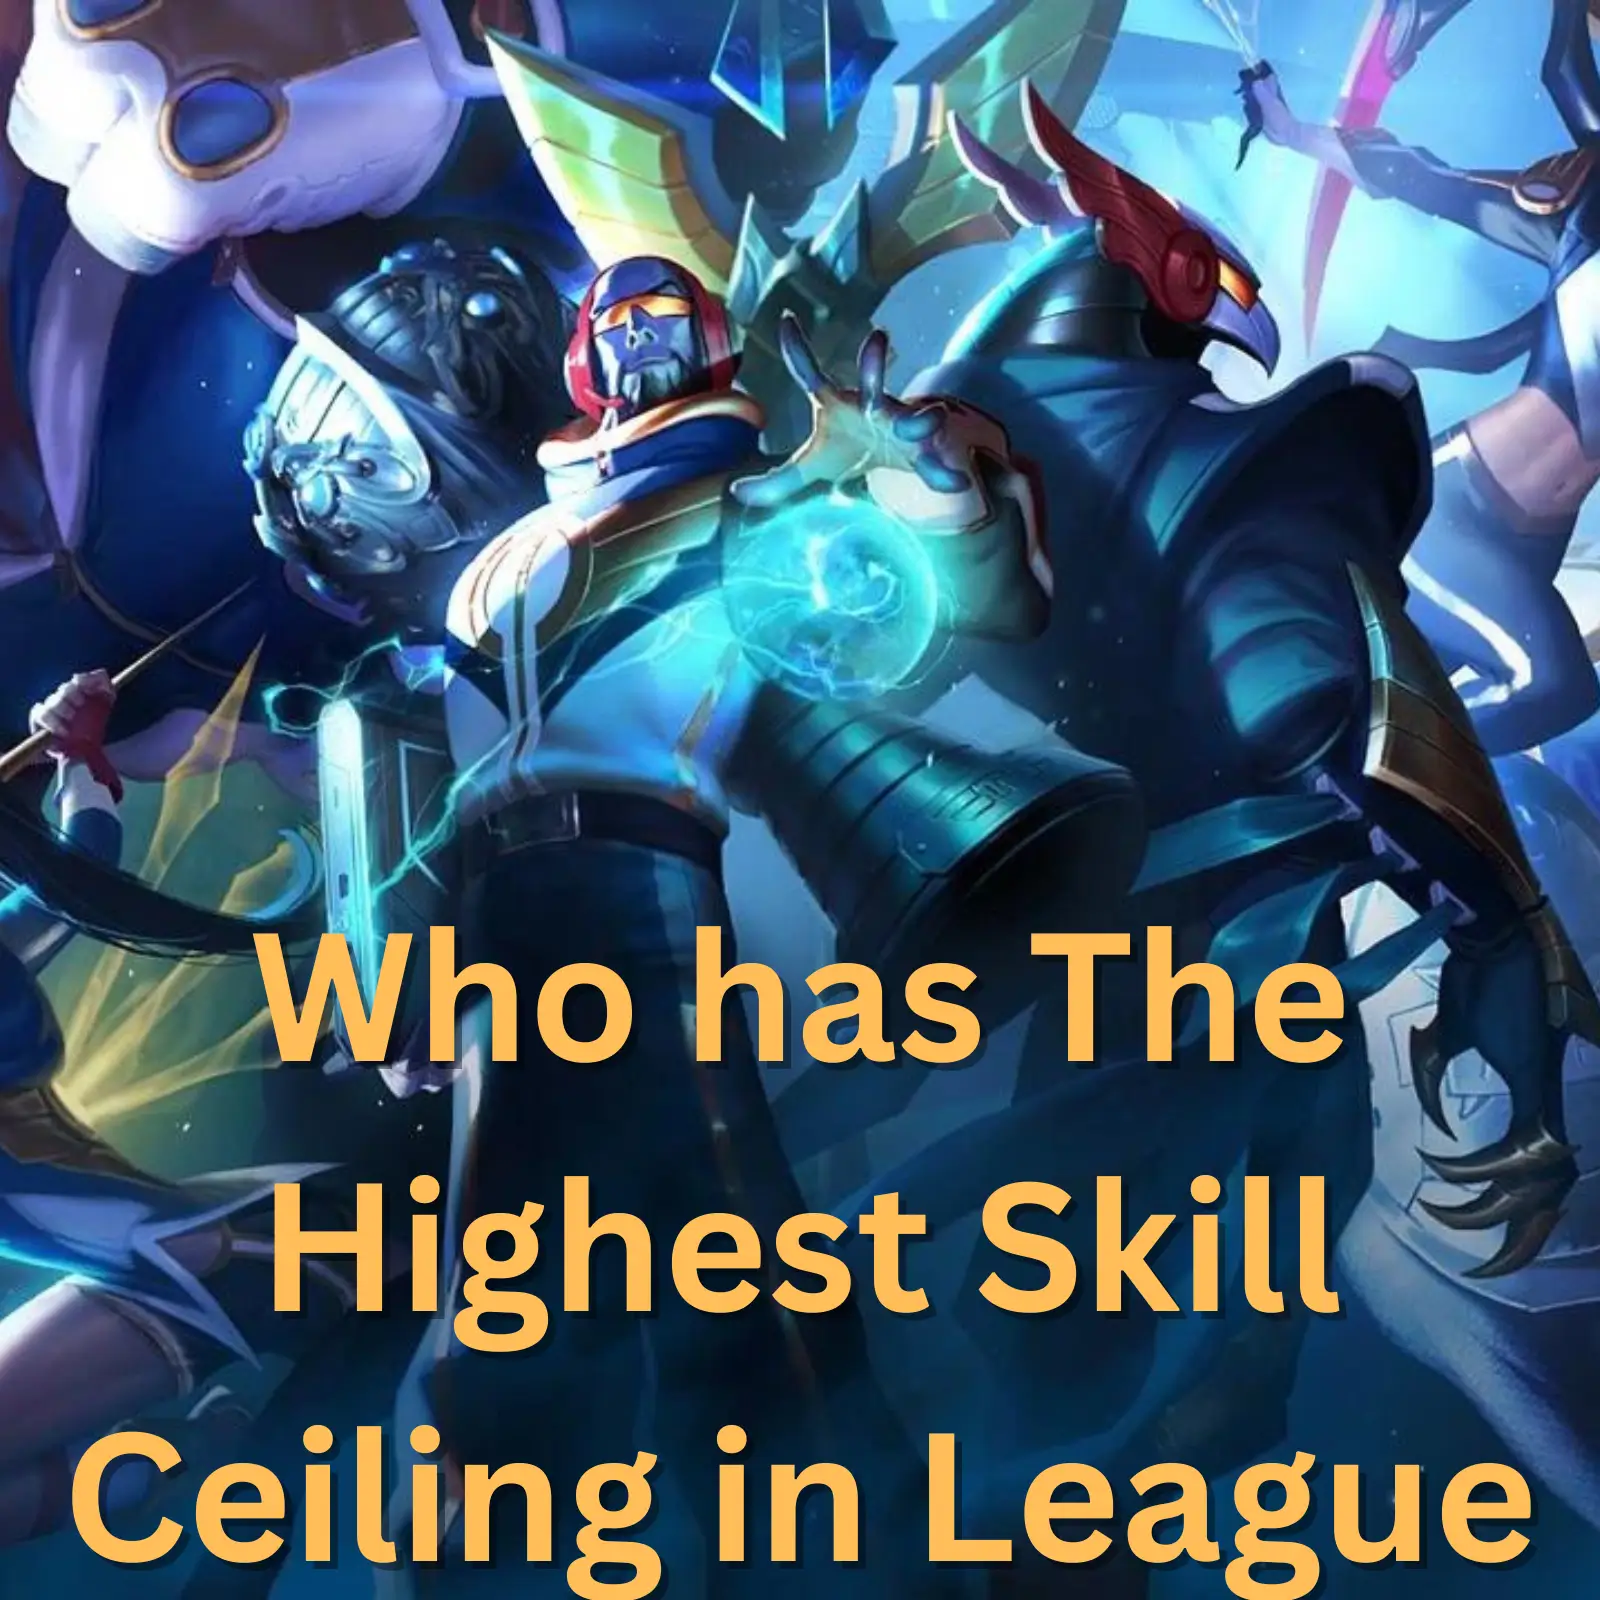 Who has The Highest Skill Ceiling in League